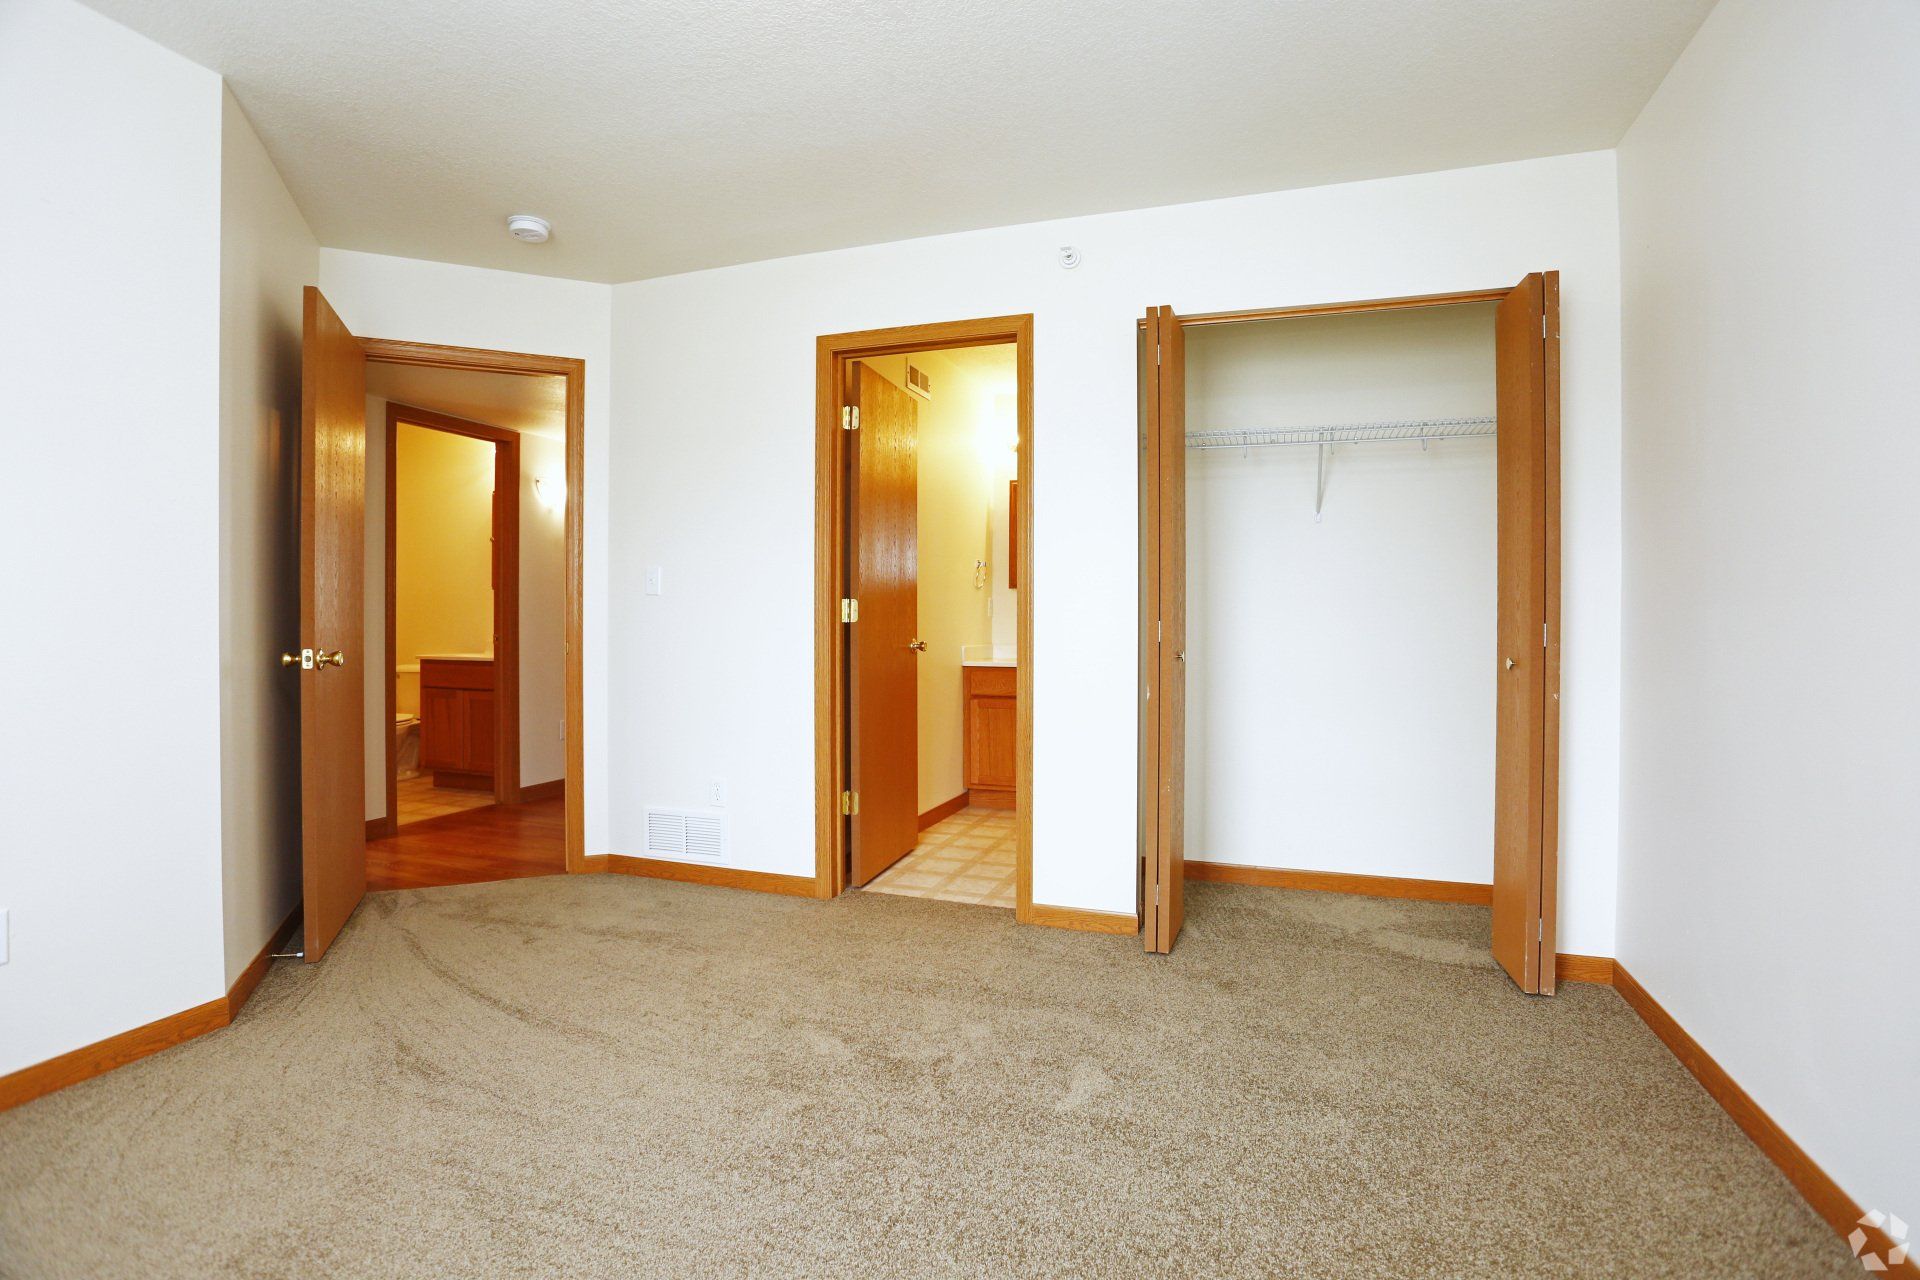 Lakeview Apts interior